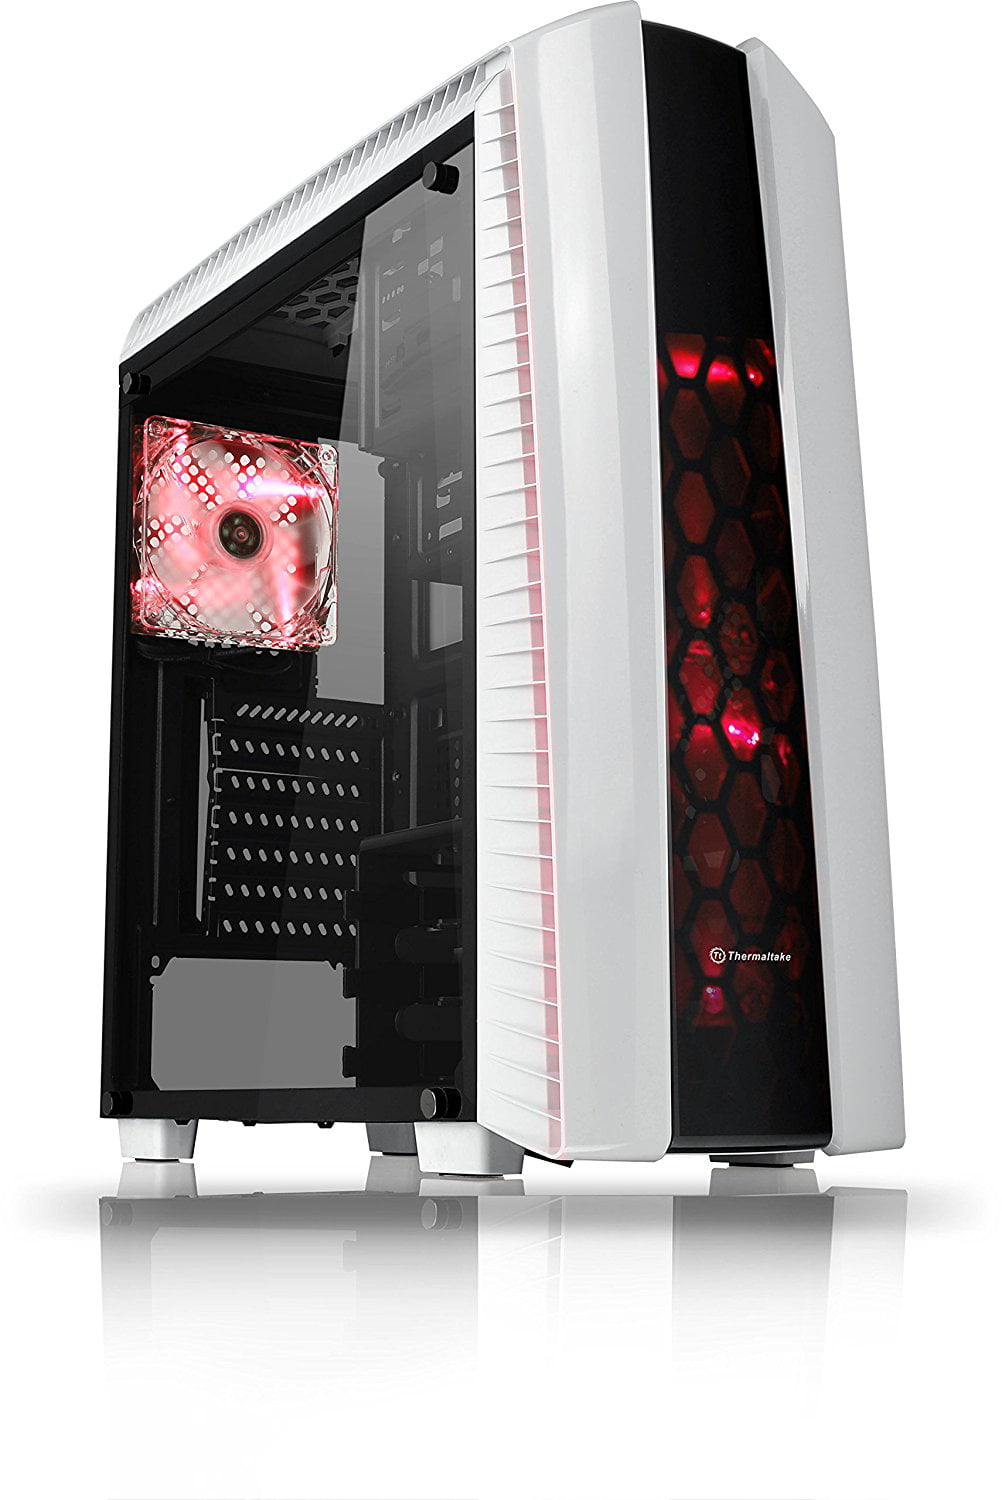 Thermaltake Versa N27 Shadow Blade ATX Gaming Mid Tower Computer Case with 3 Red LED Riing Fan Pre-installed CA-1H6-00M1WN-02 